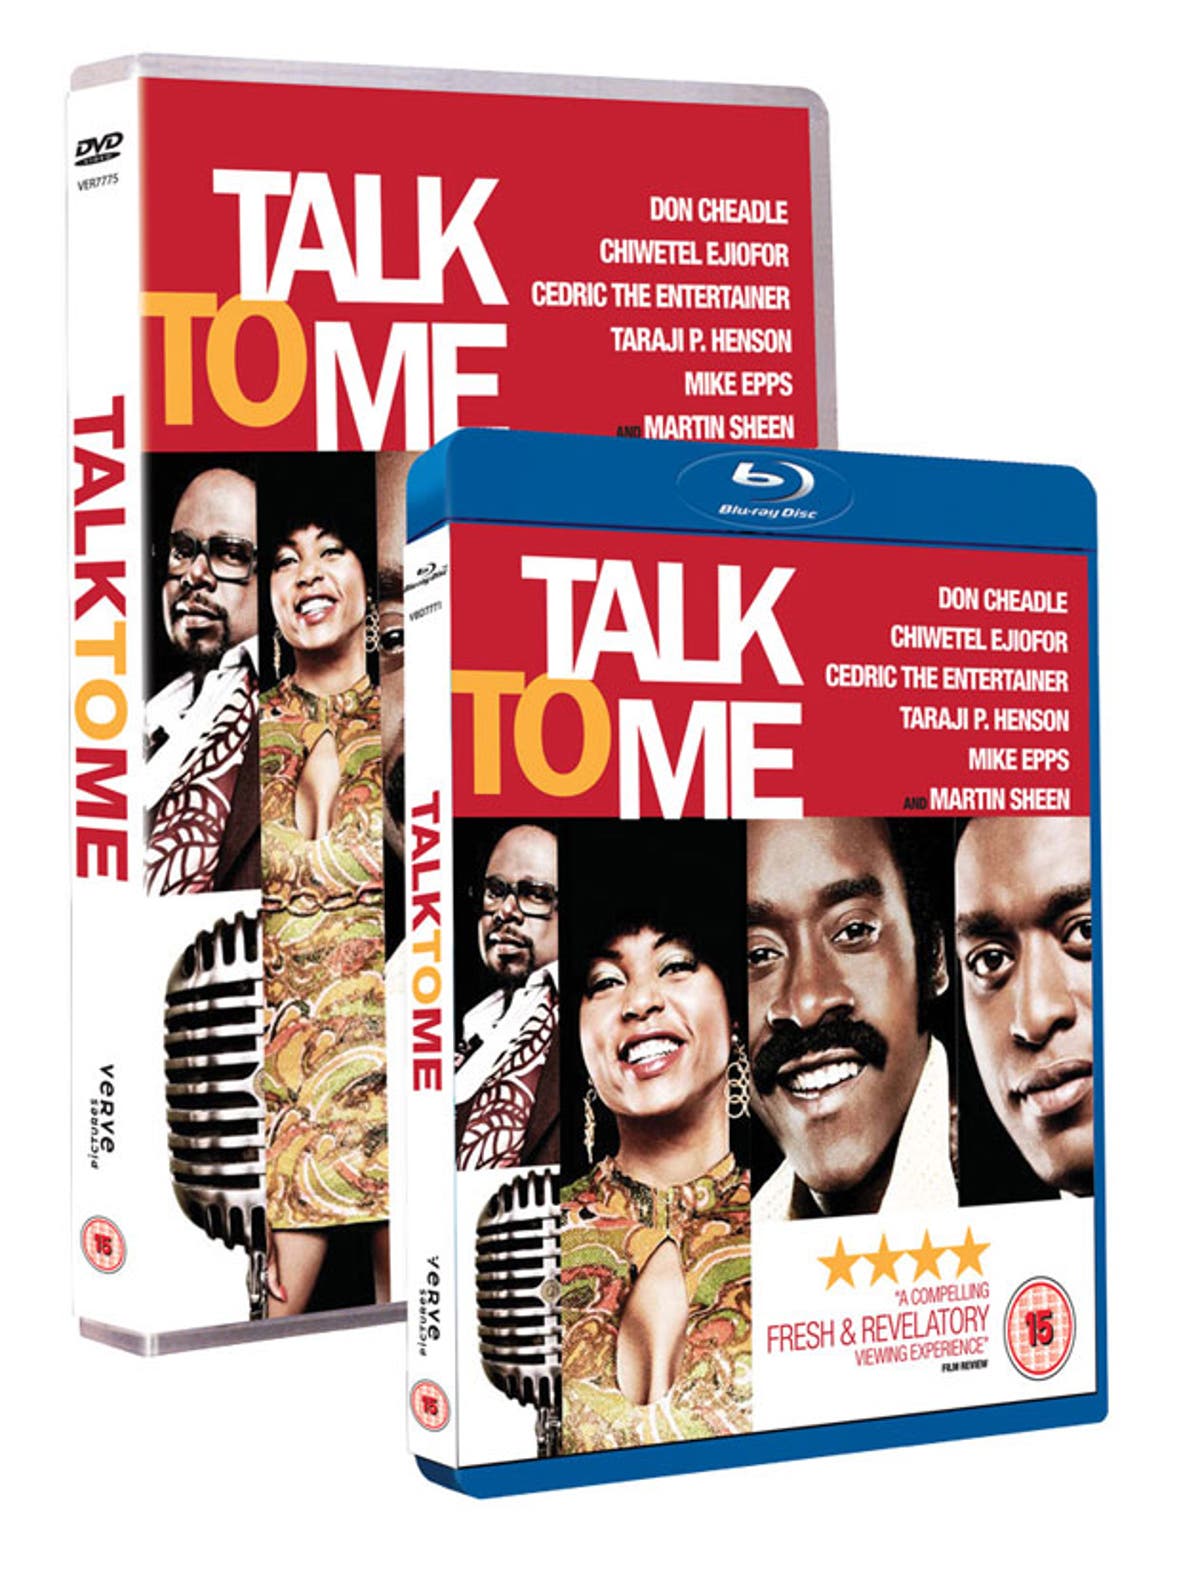 Win 'Talk to Me' on DVD or BLURAY The Independent The Independent